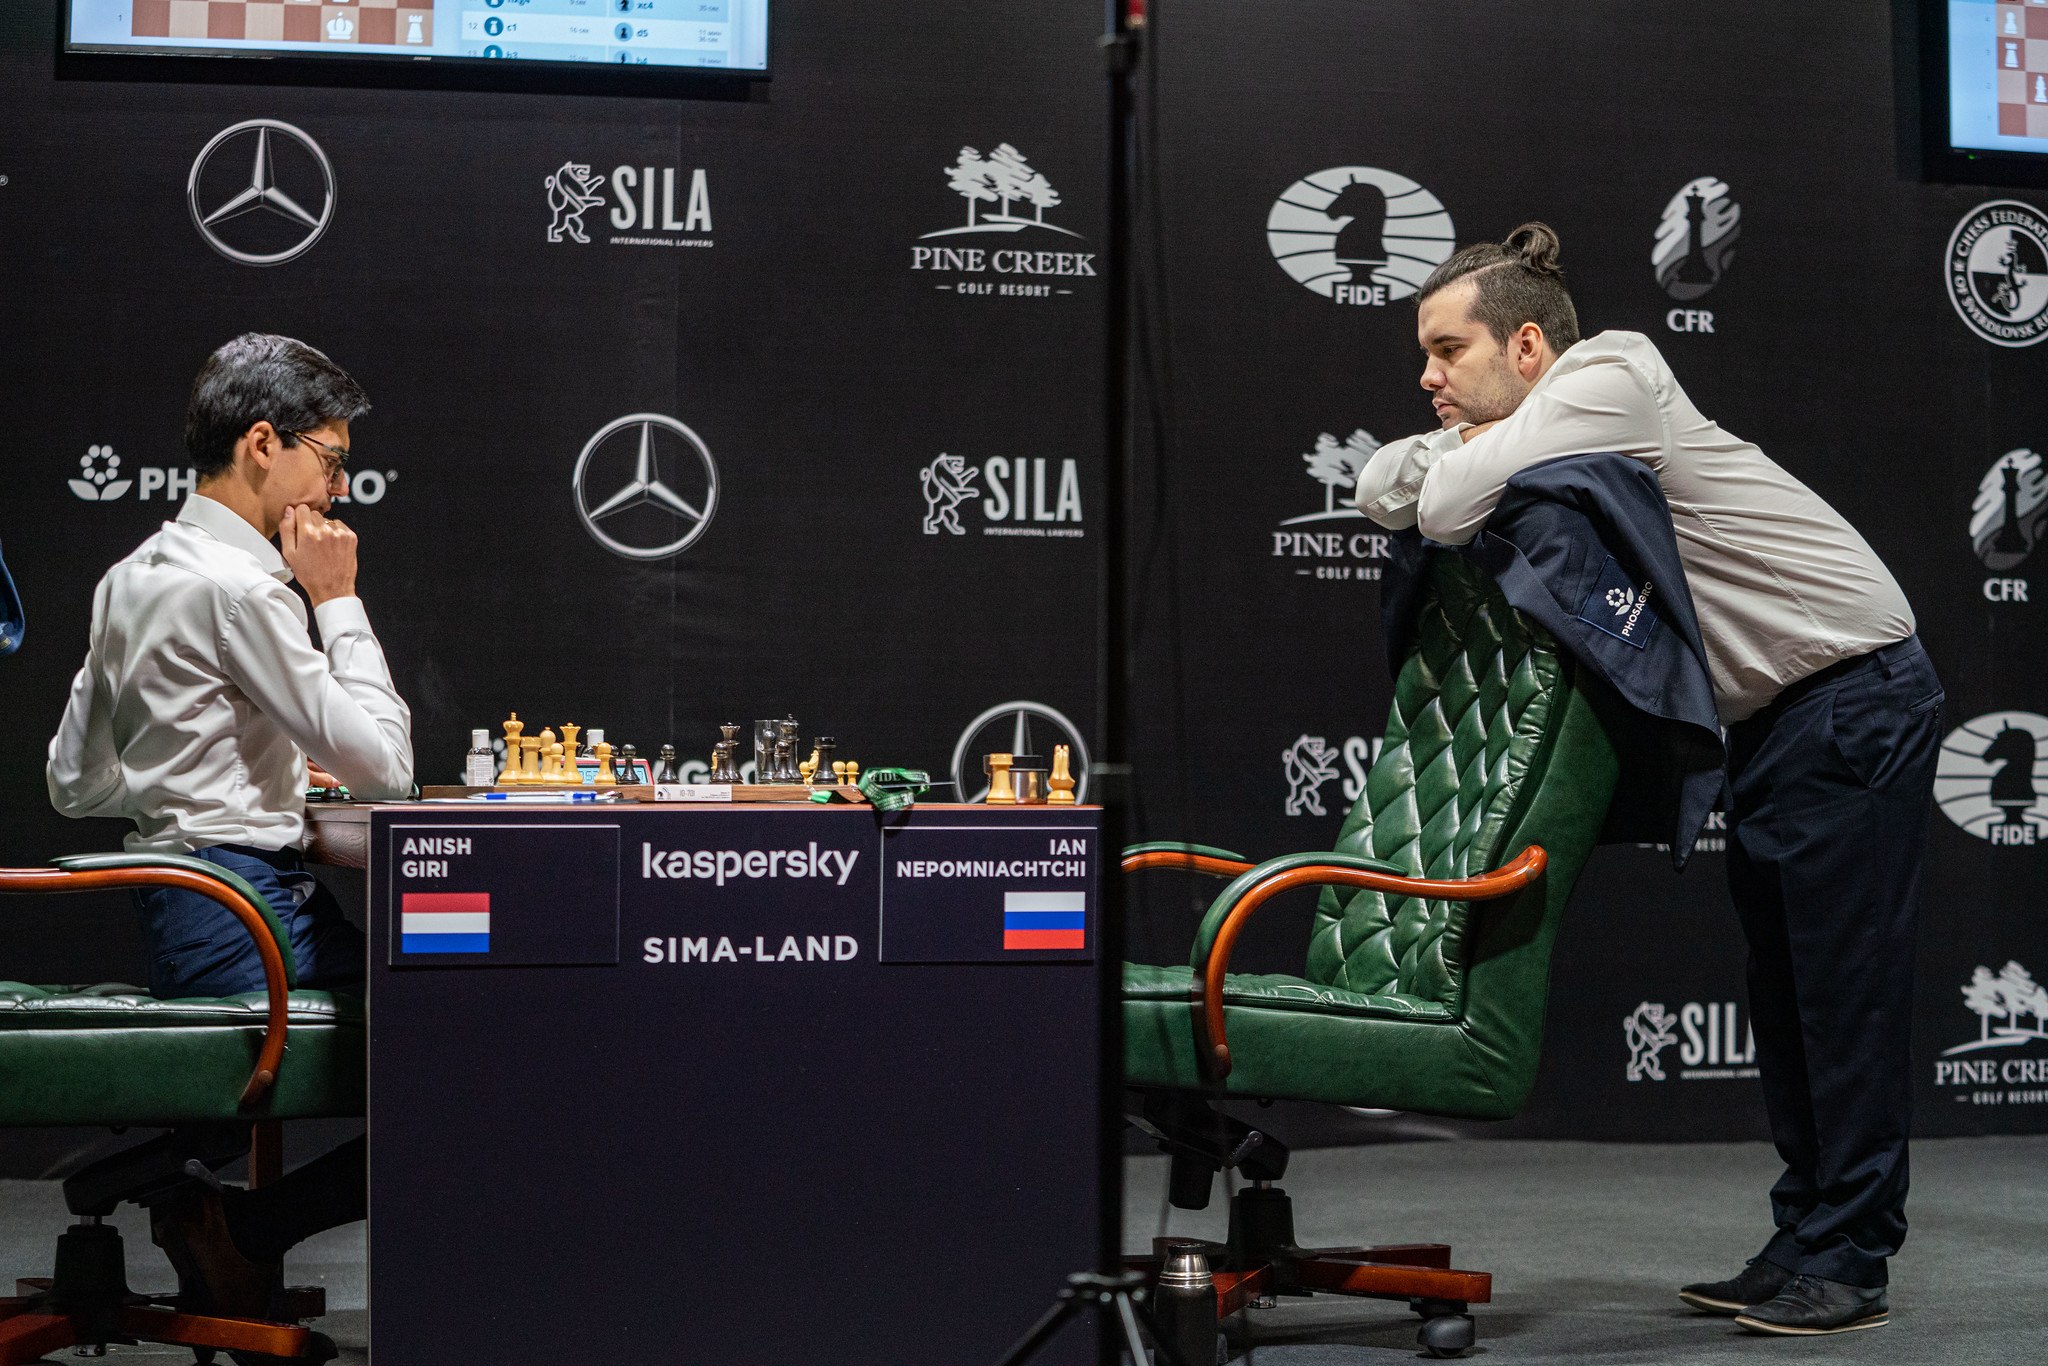 Bid process for 2020 World Chess Candidates tournament launched